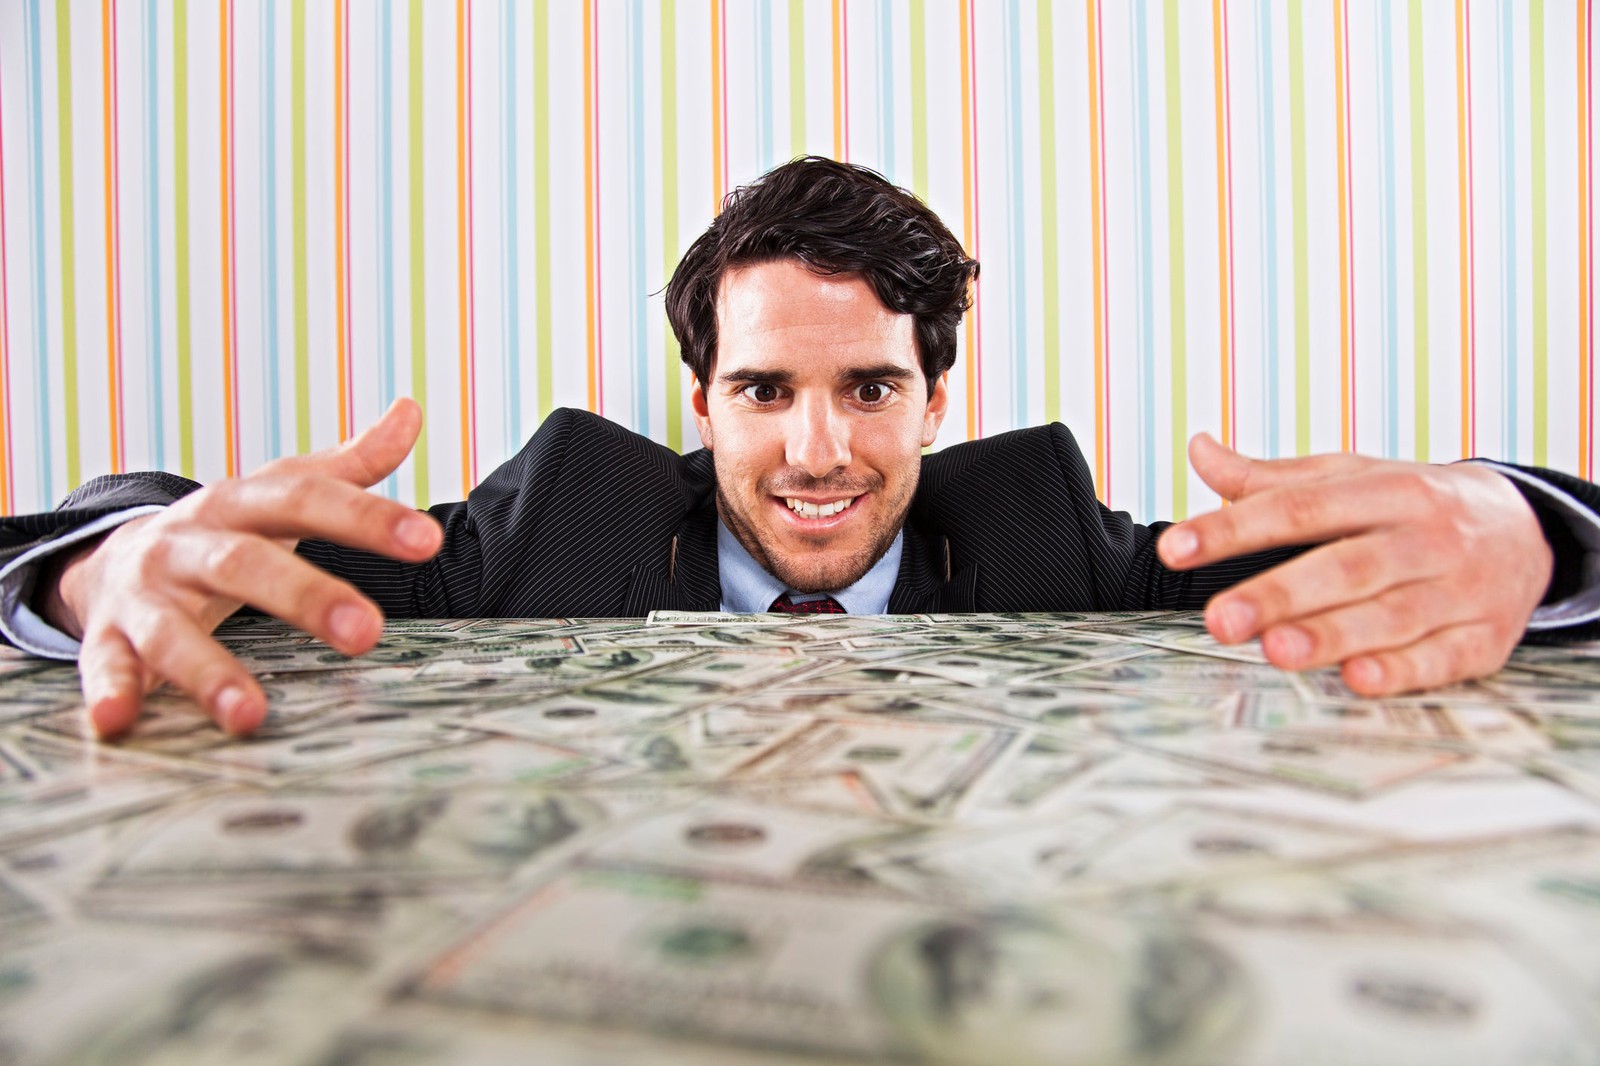 Make Some Typical Workday Choices and We’ll Reveal the Vibe You Give Off Businessman With Money